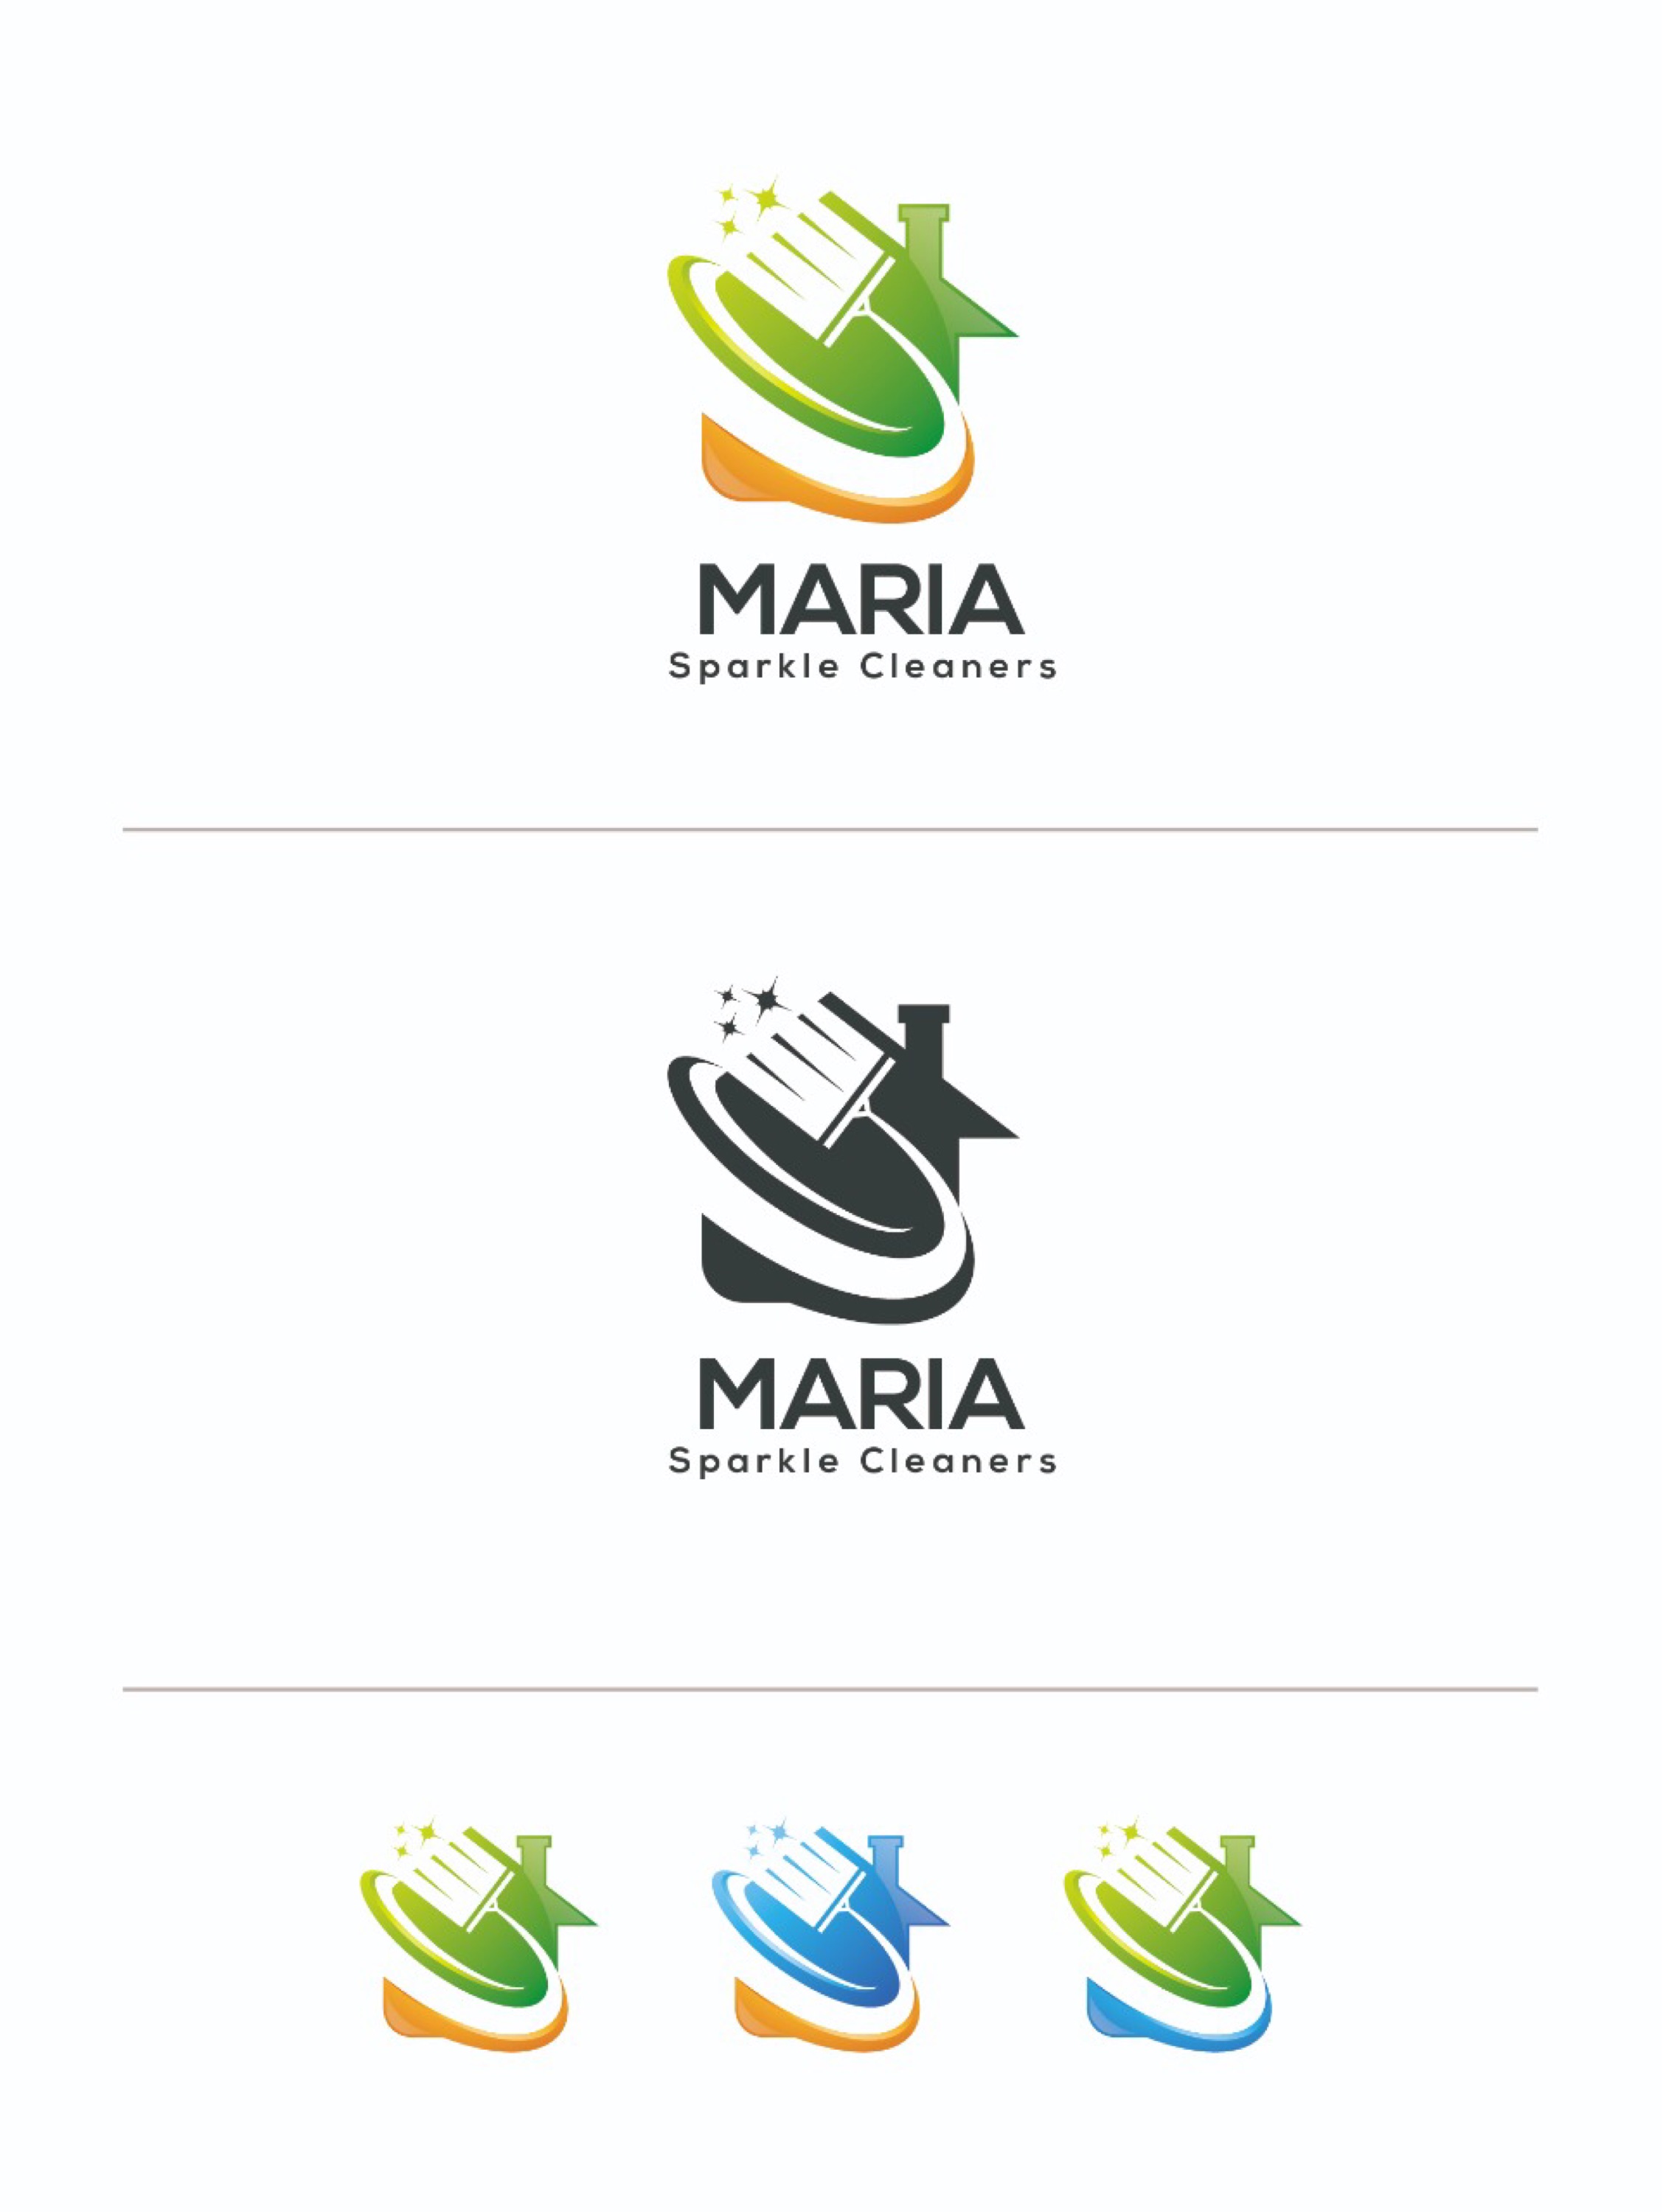 Maria Sparkle Cleaners Logo